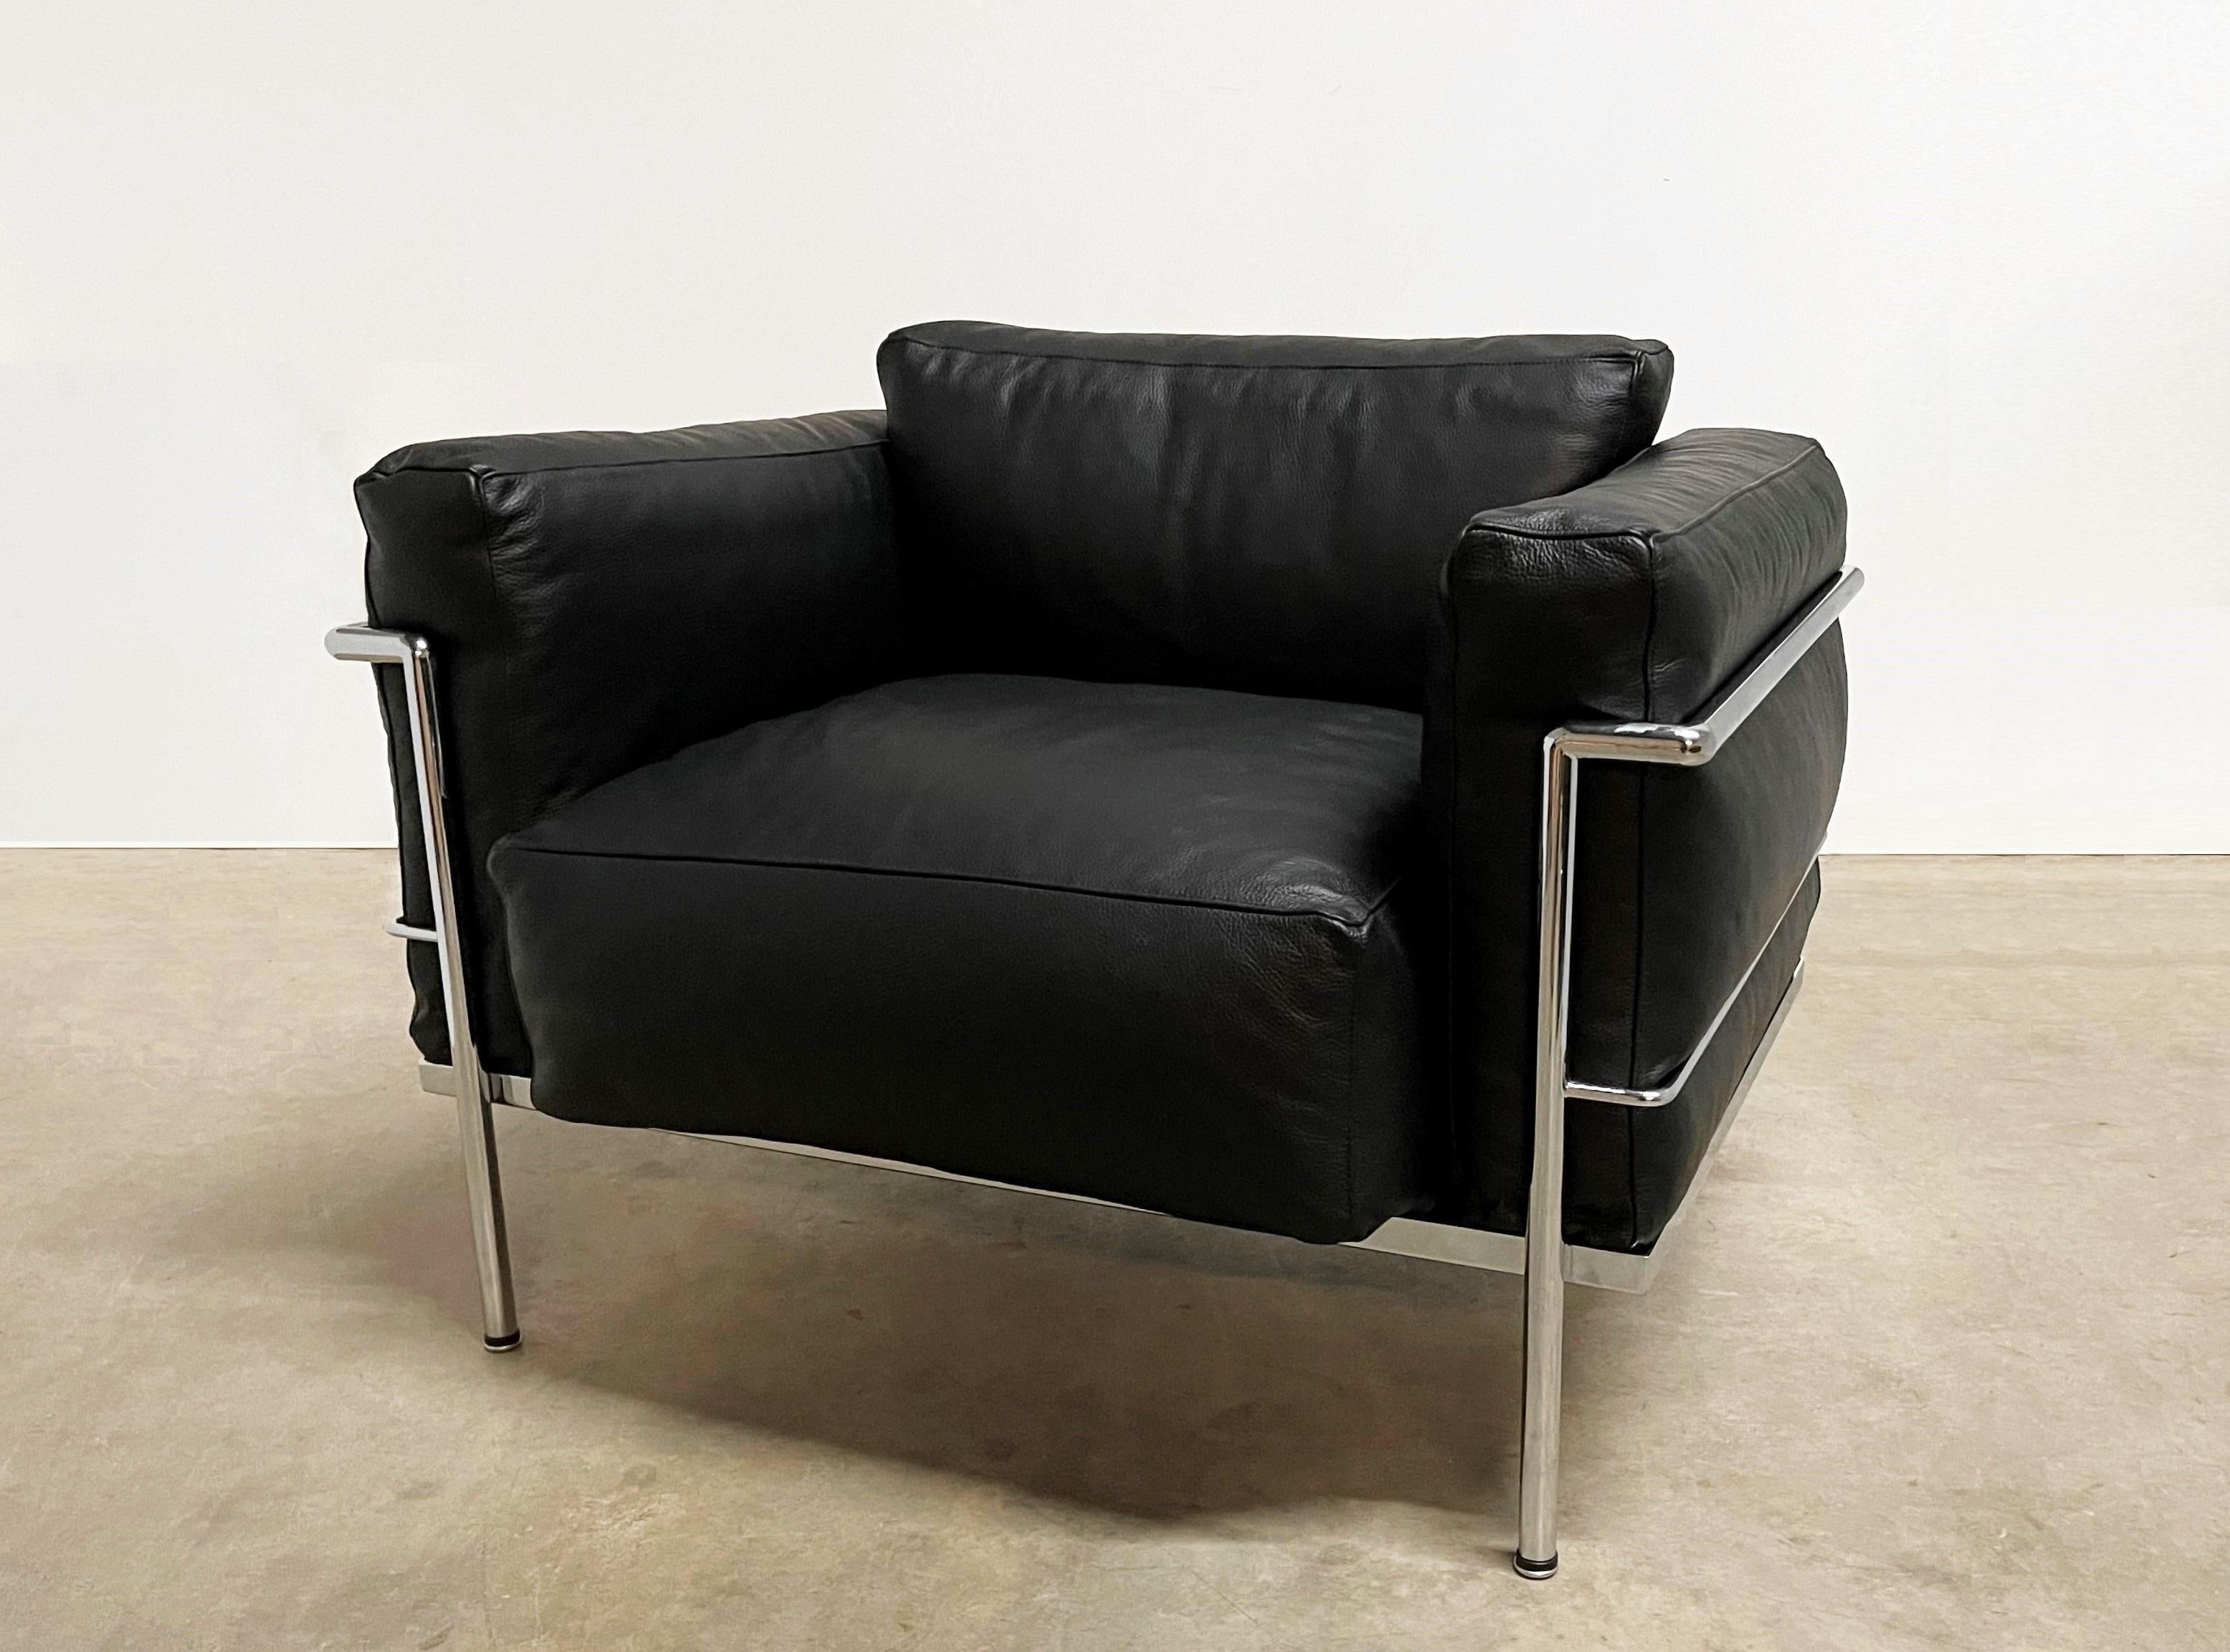 Bauhaus Pierre Jeanneret, Charlotte Perriand & Le Corbusier Grand Comfort Lounge Chairs For Sale